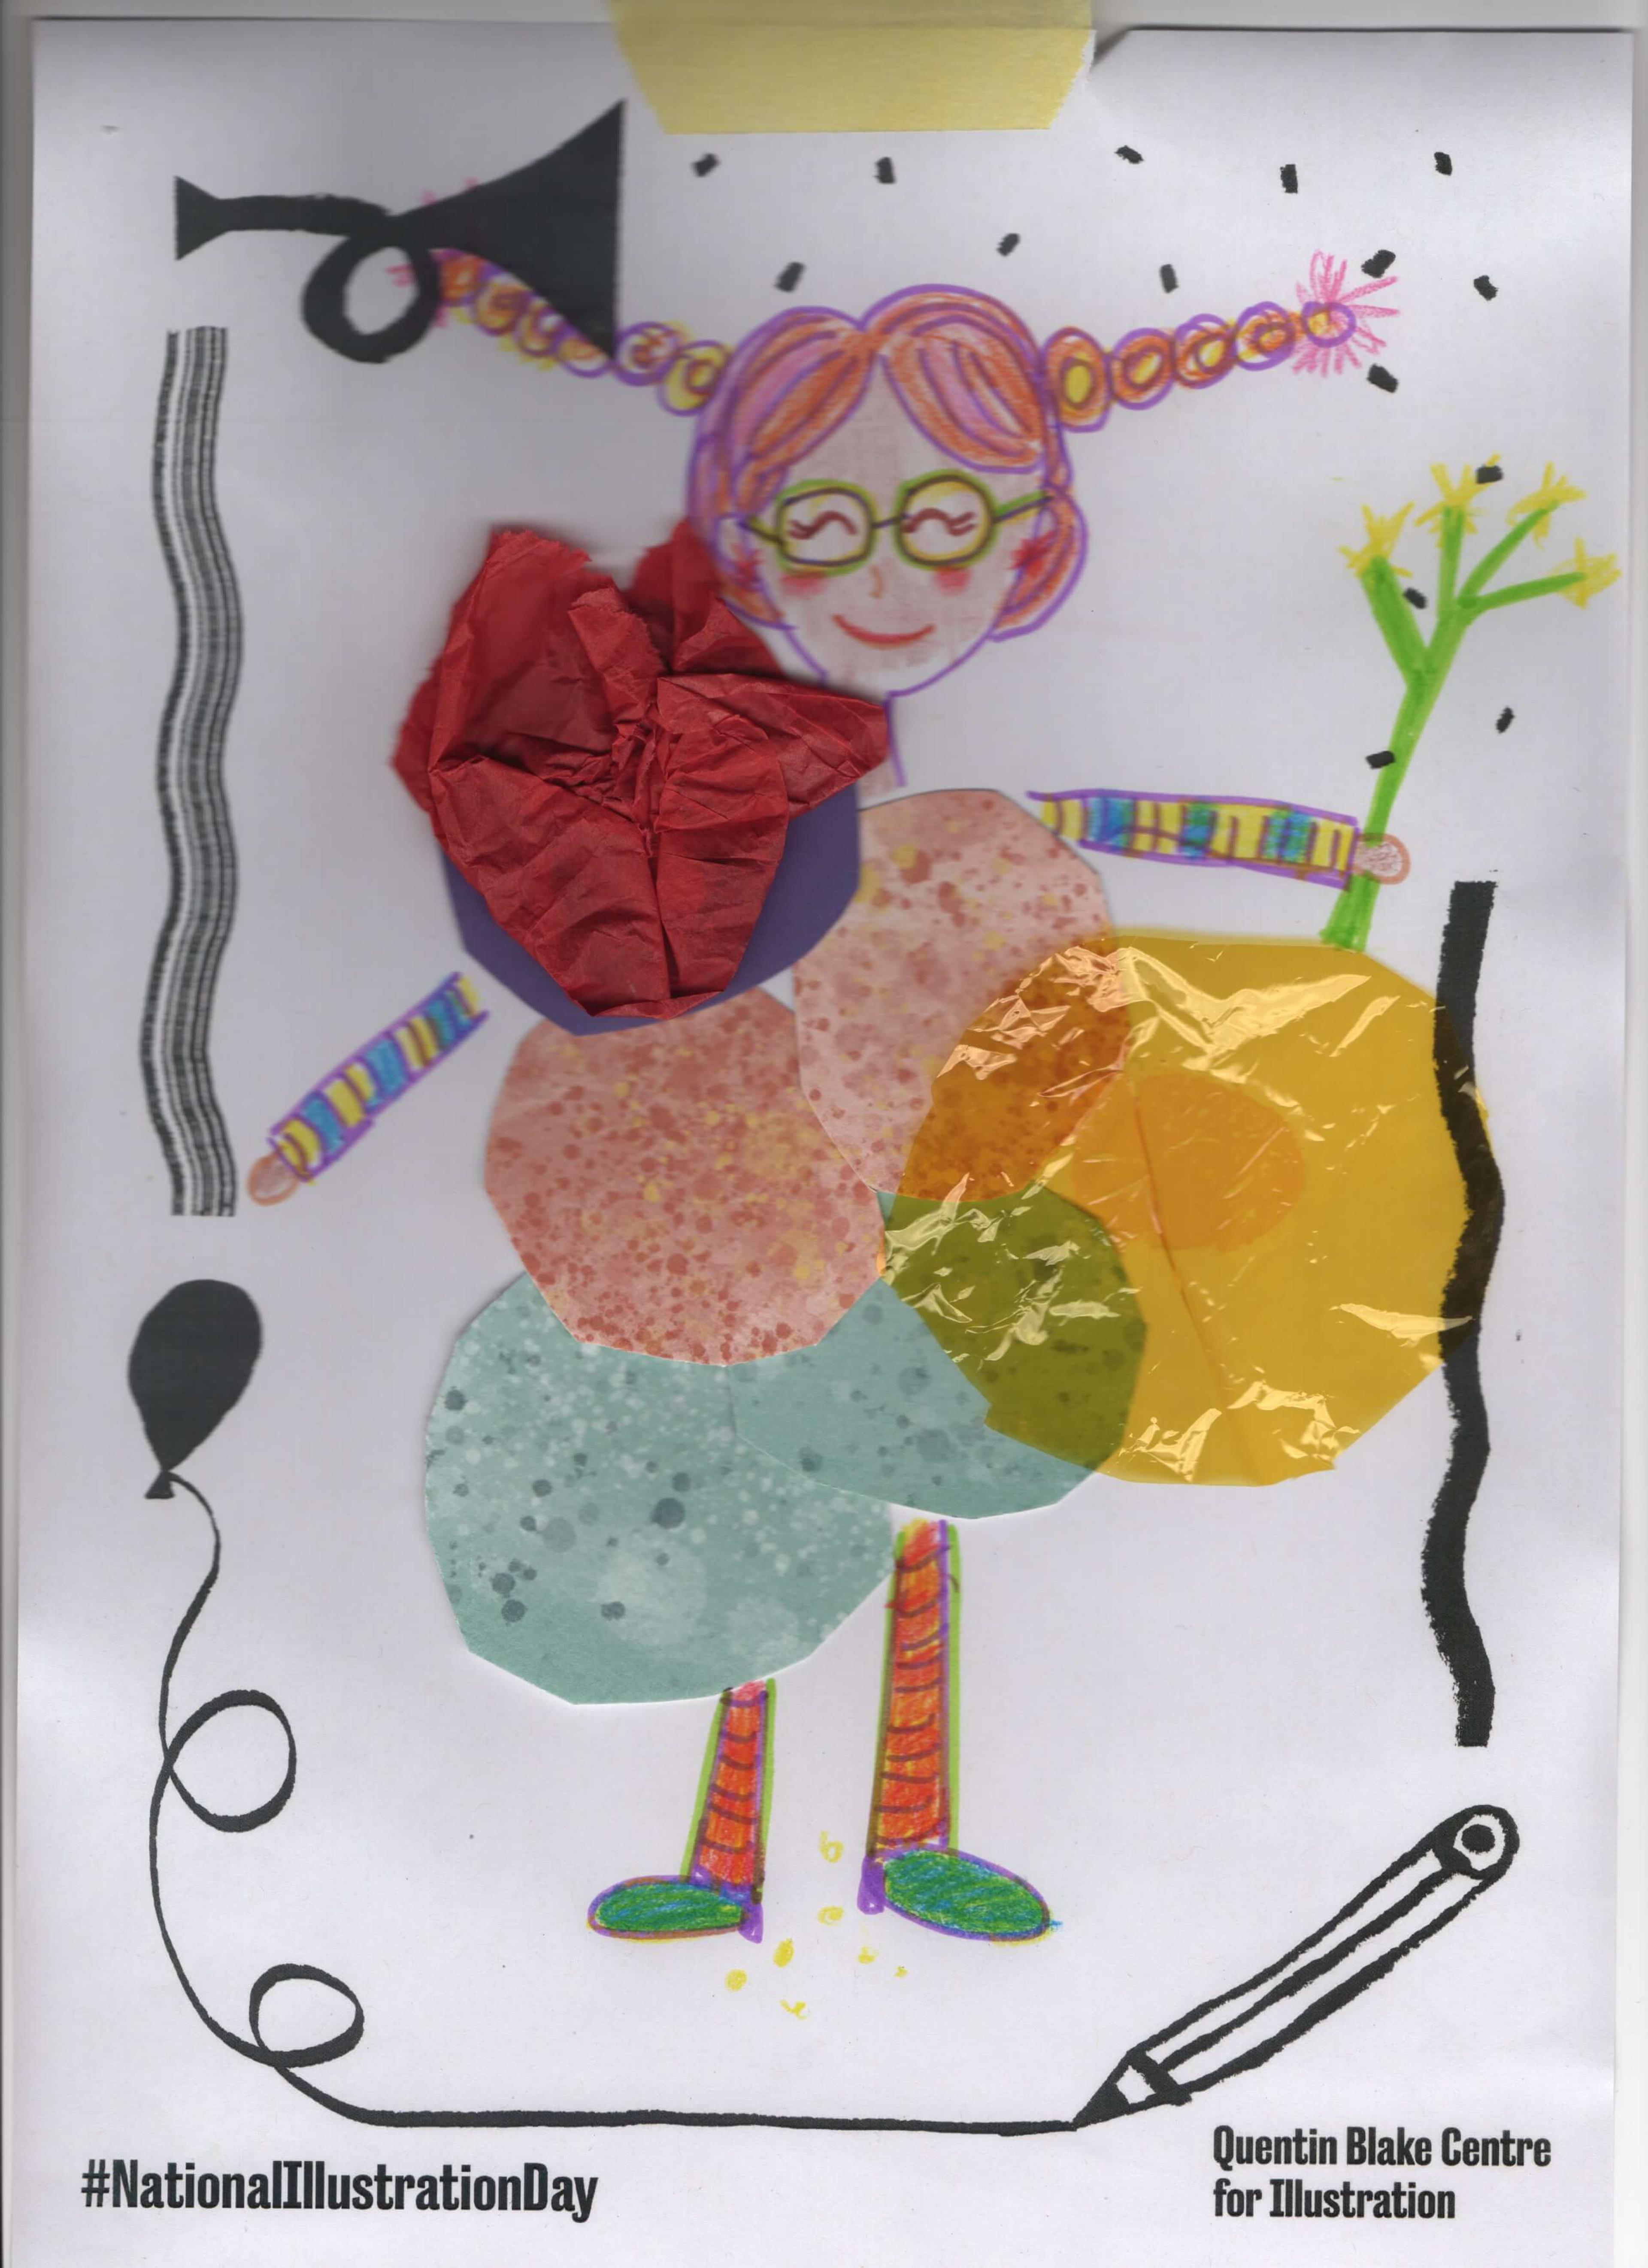 Drawing of a pink-haired child with glasses and pigtails. The child's clothes are depicted using abstract cut-out shapes.